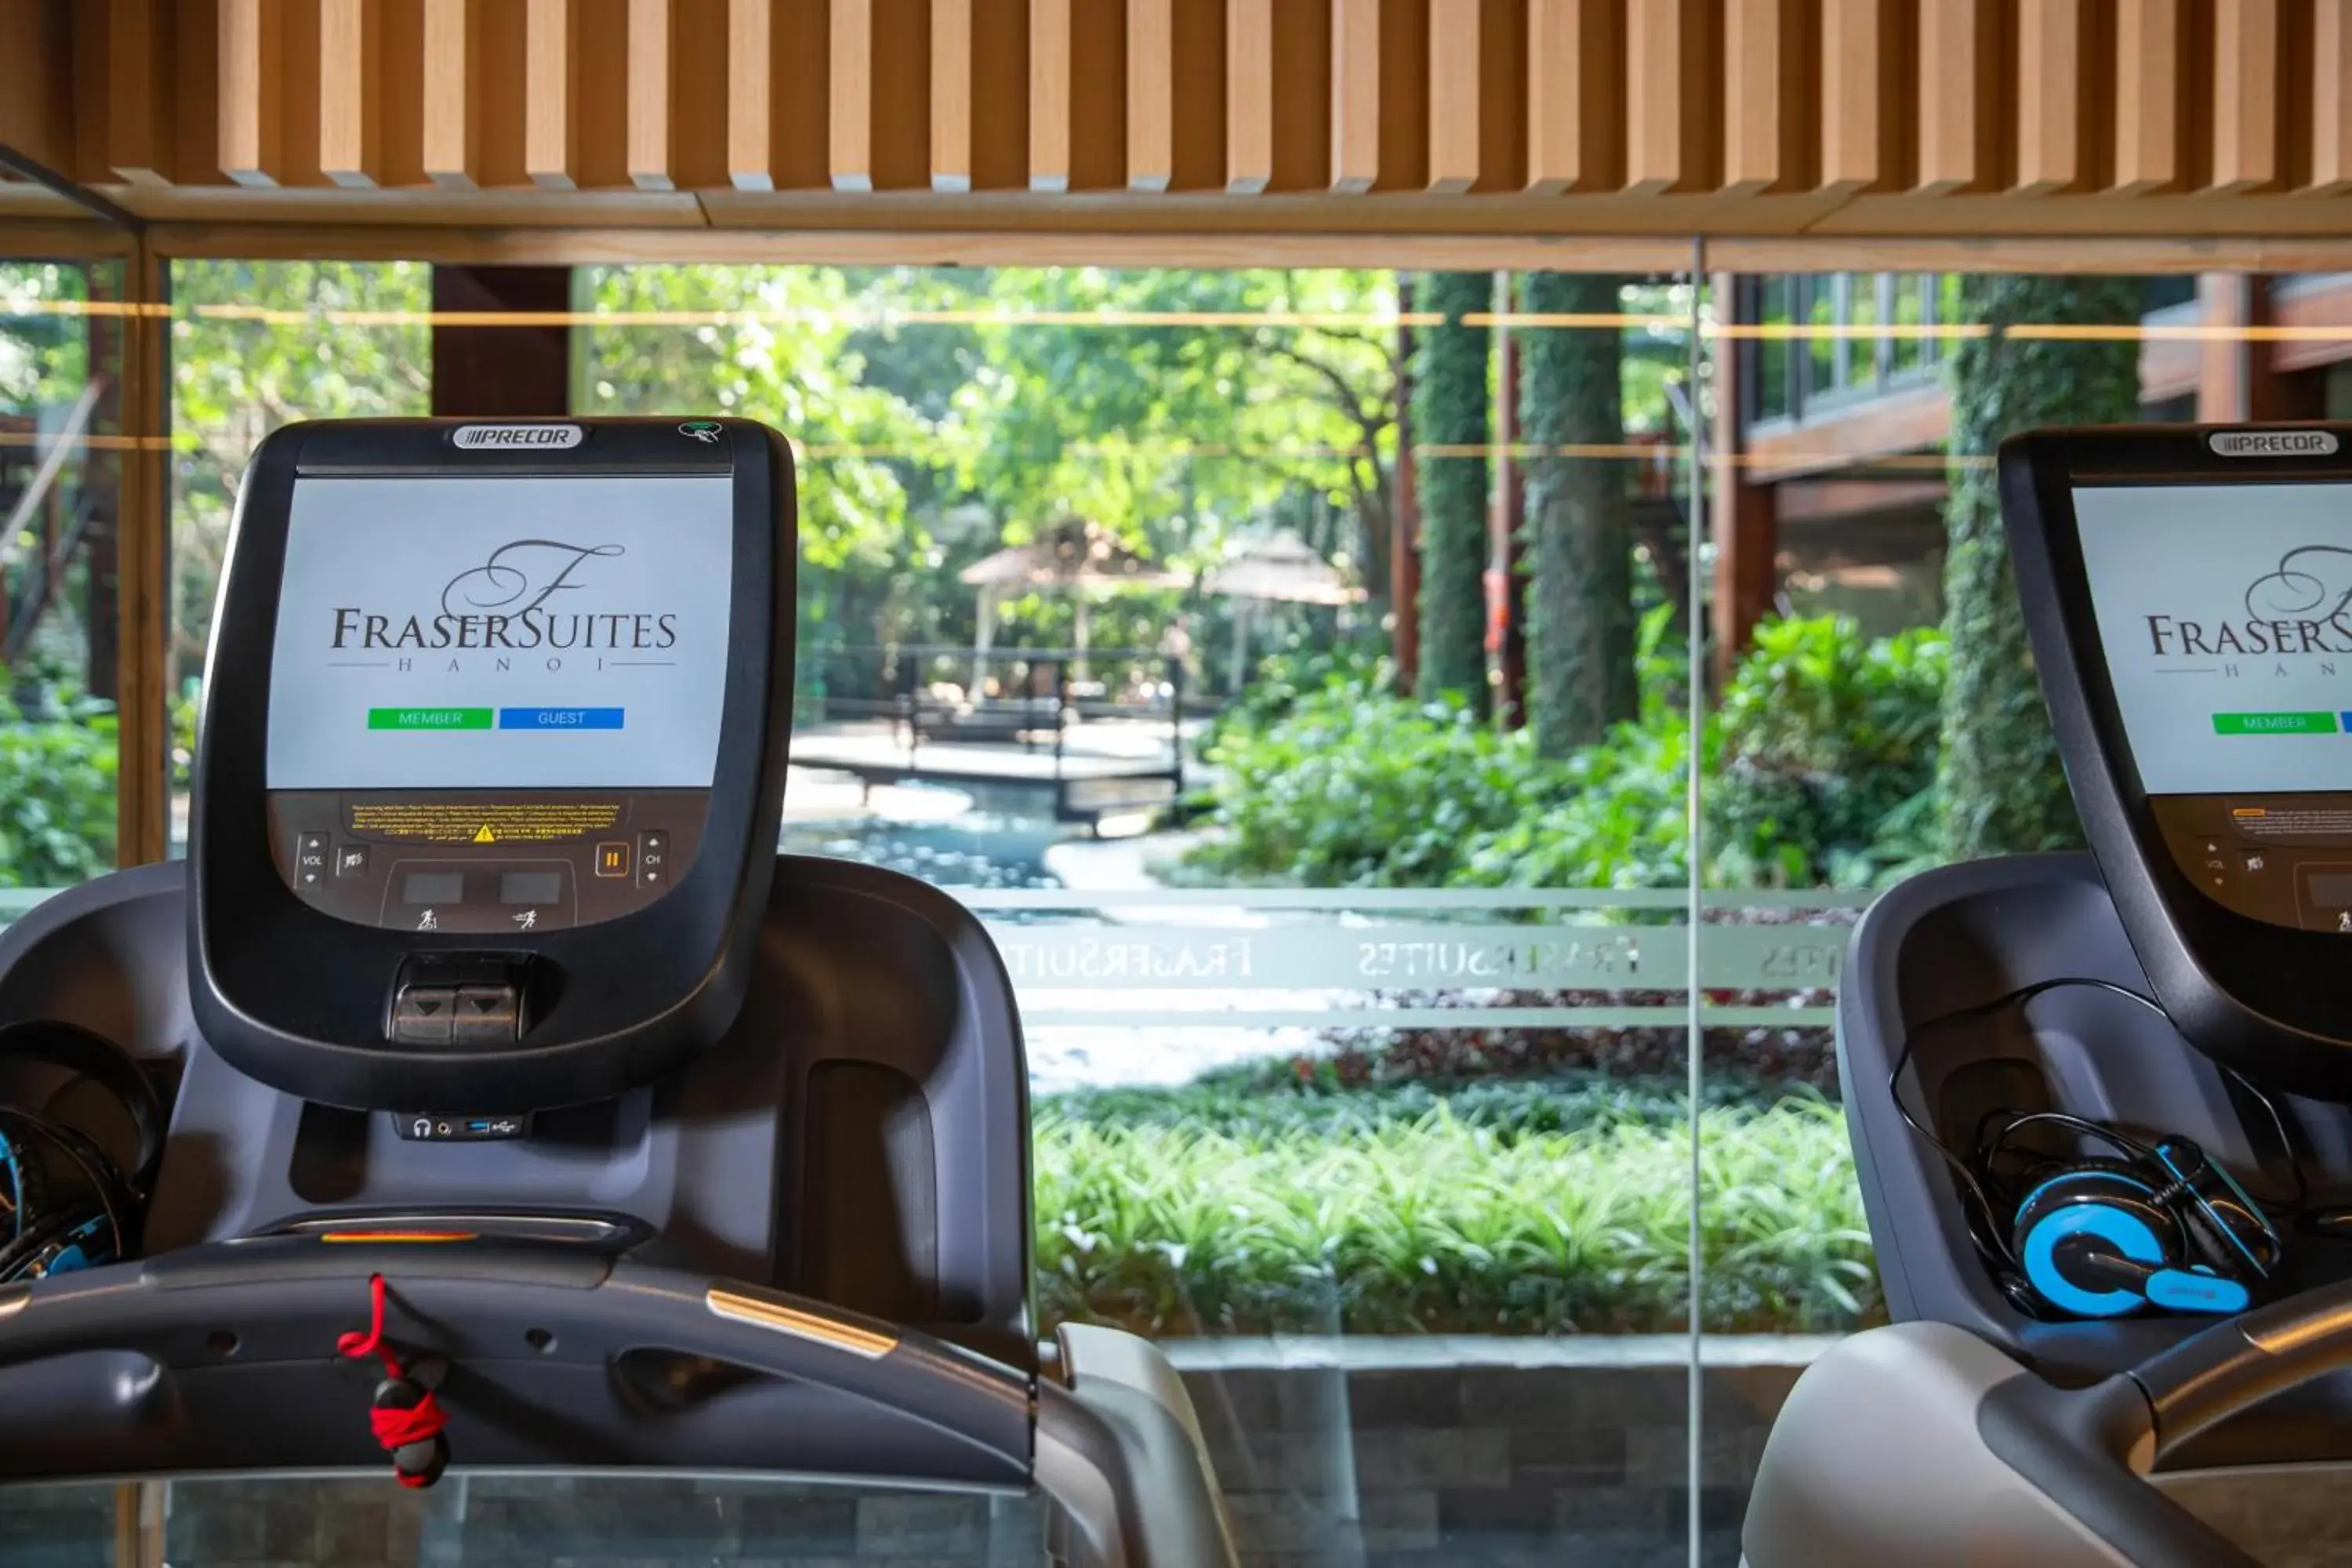 Fitness centre/facilities, Fitness Center/Facilities in Fraser Suites Hanoi